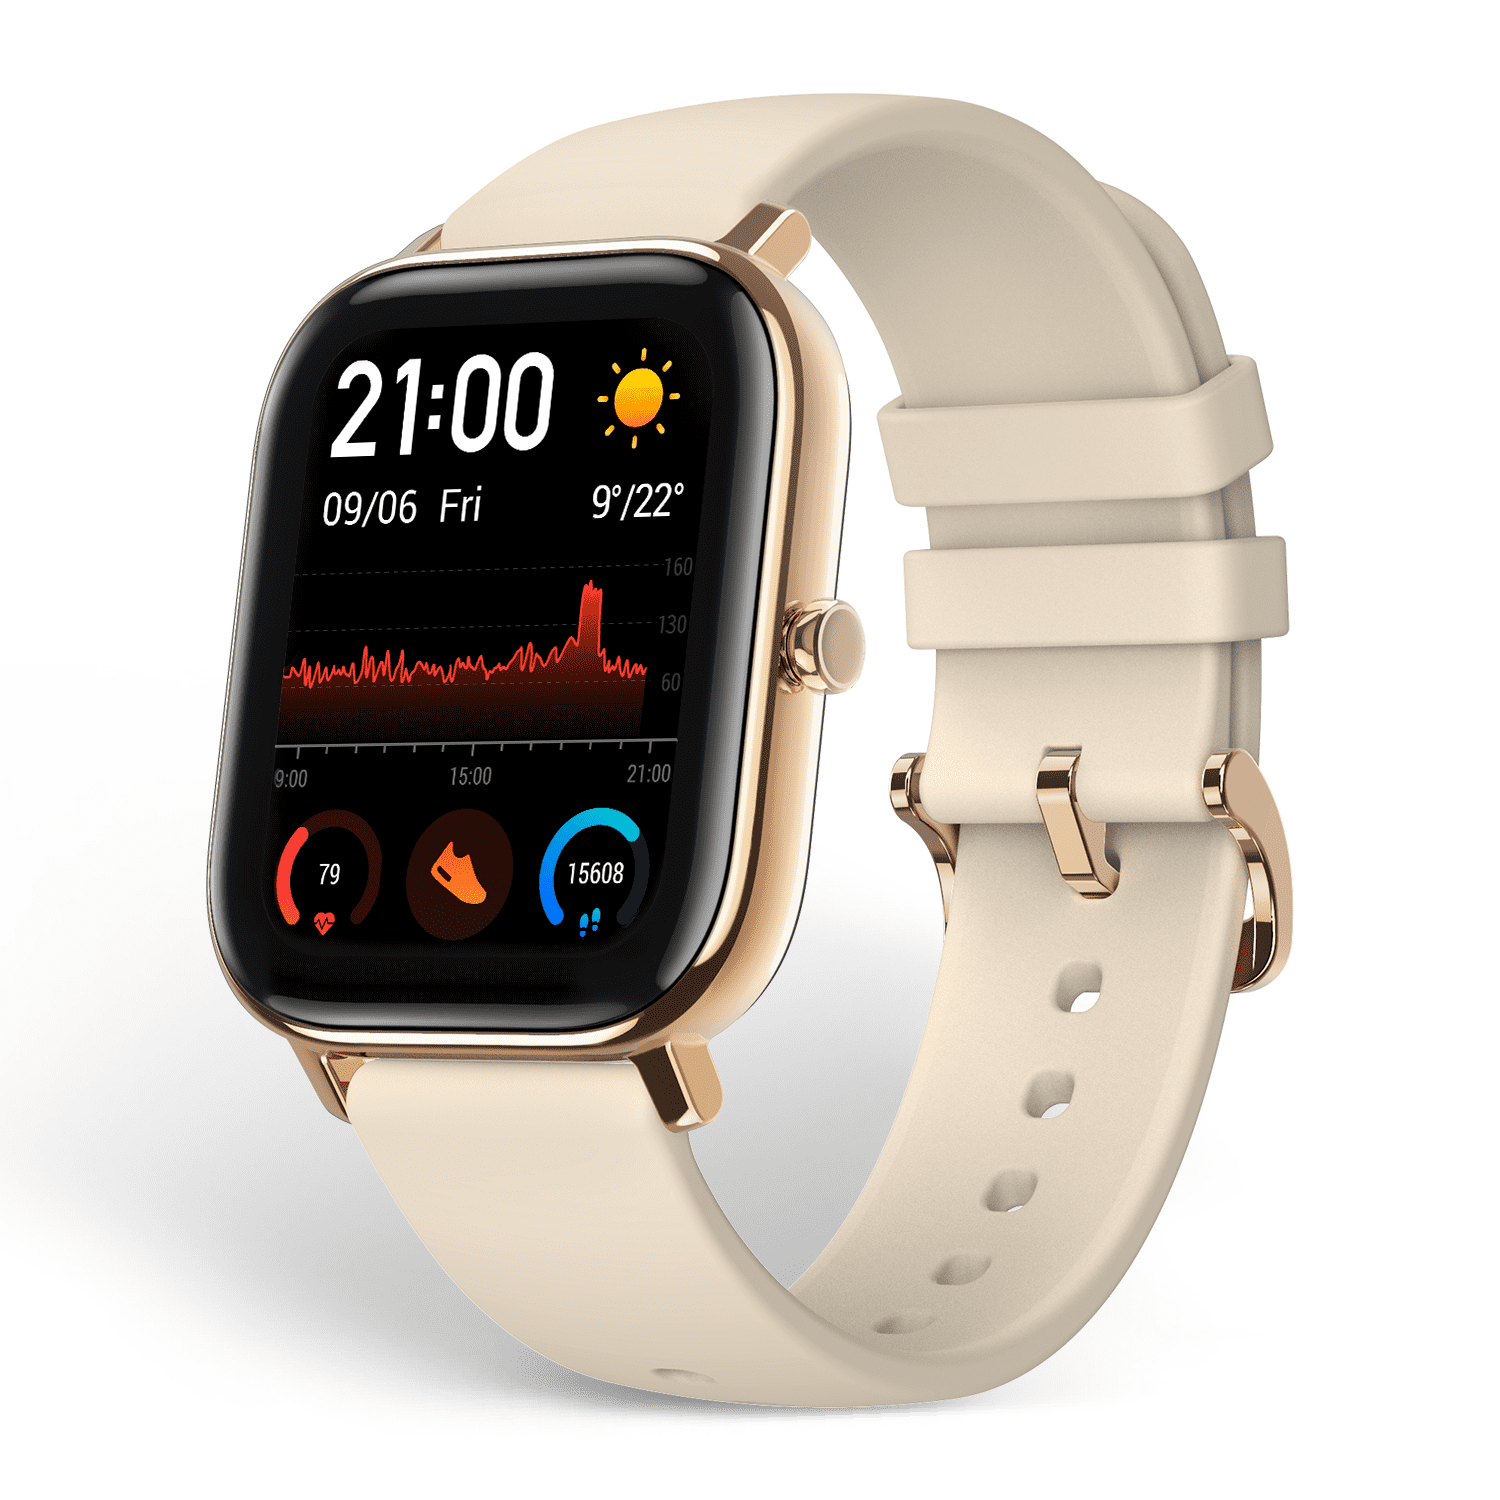 GTS Fitness Smart Watch: 14-Day Battery Life, Heart Rate Monitor, Music 1.65" Sleep and Swim Tracking, GPS, Water Resistant, Smart Notifications, Beige Walmart.com